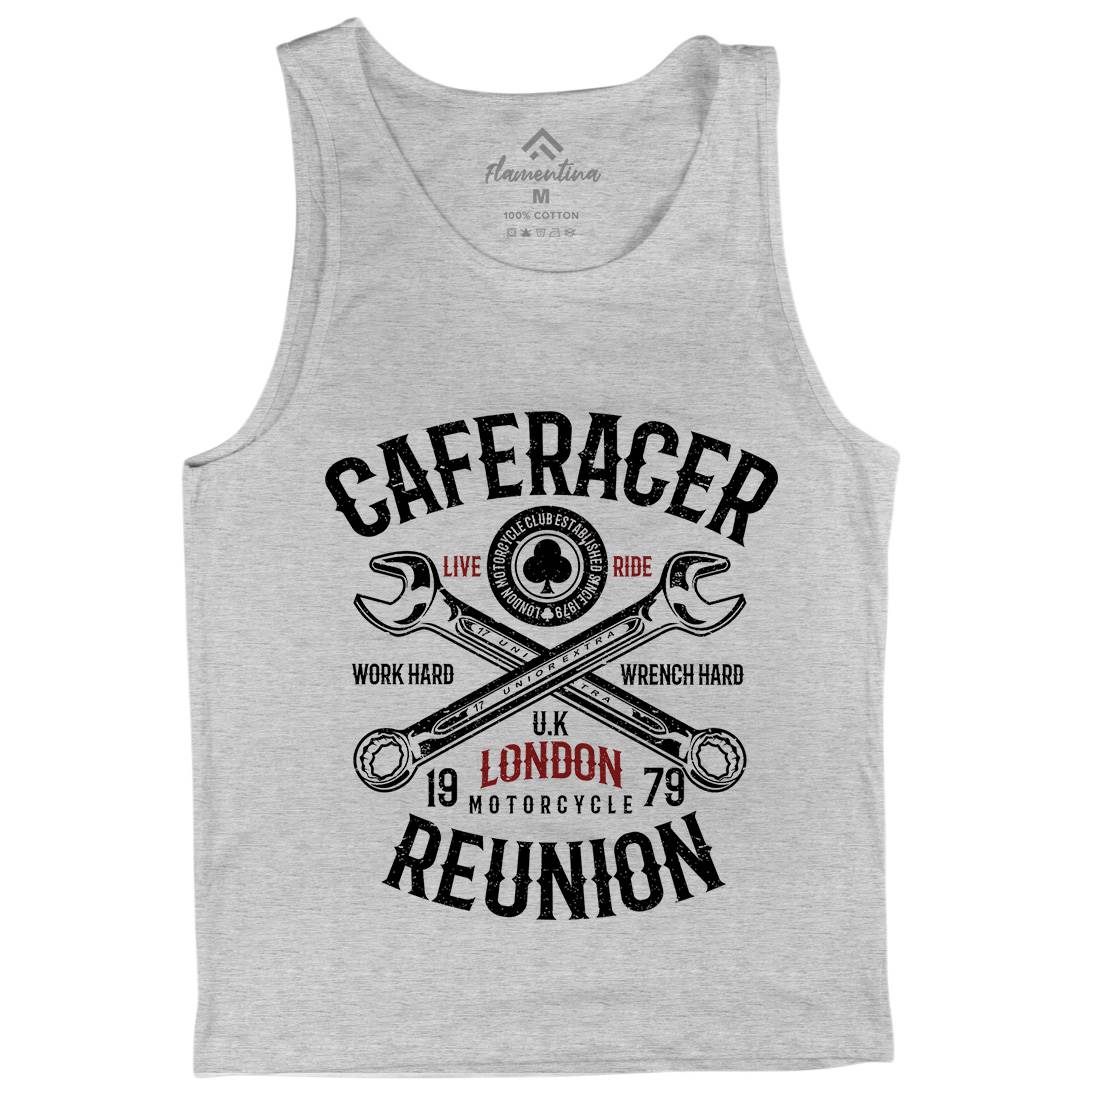 Caferacer Reunion Mens Tank Top Vest Motorcycles A025